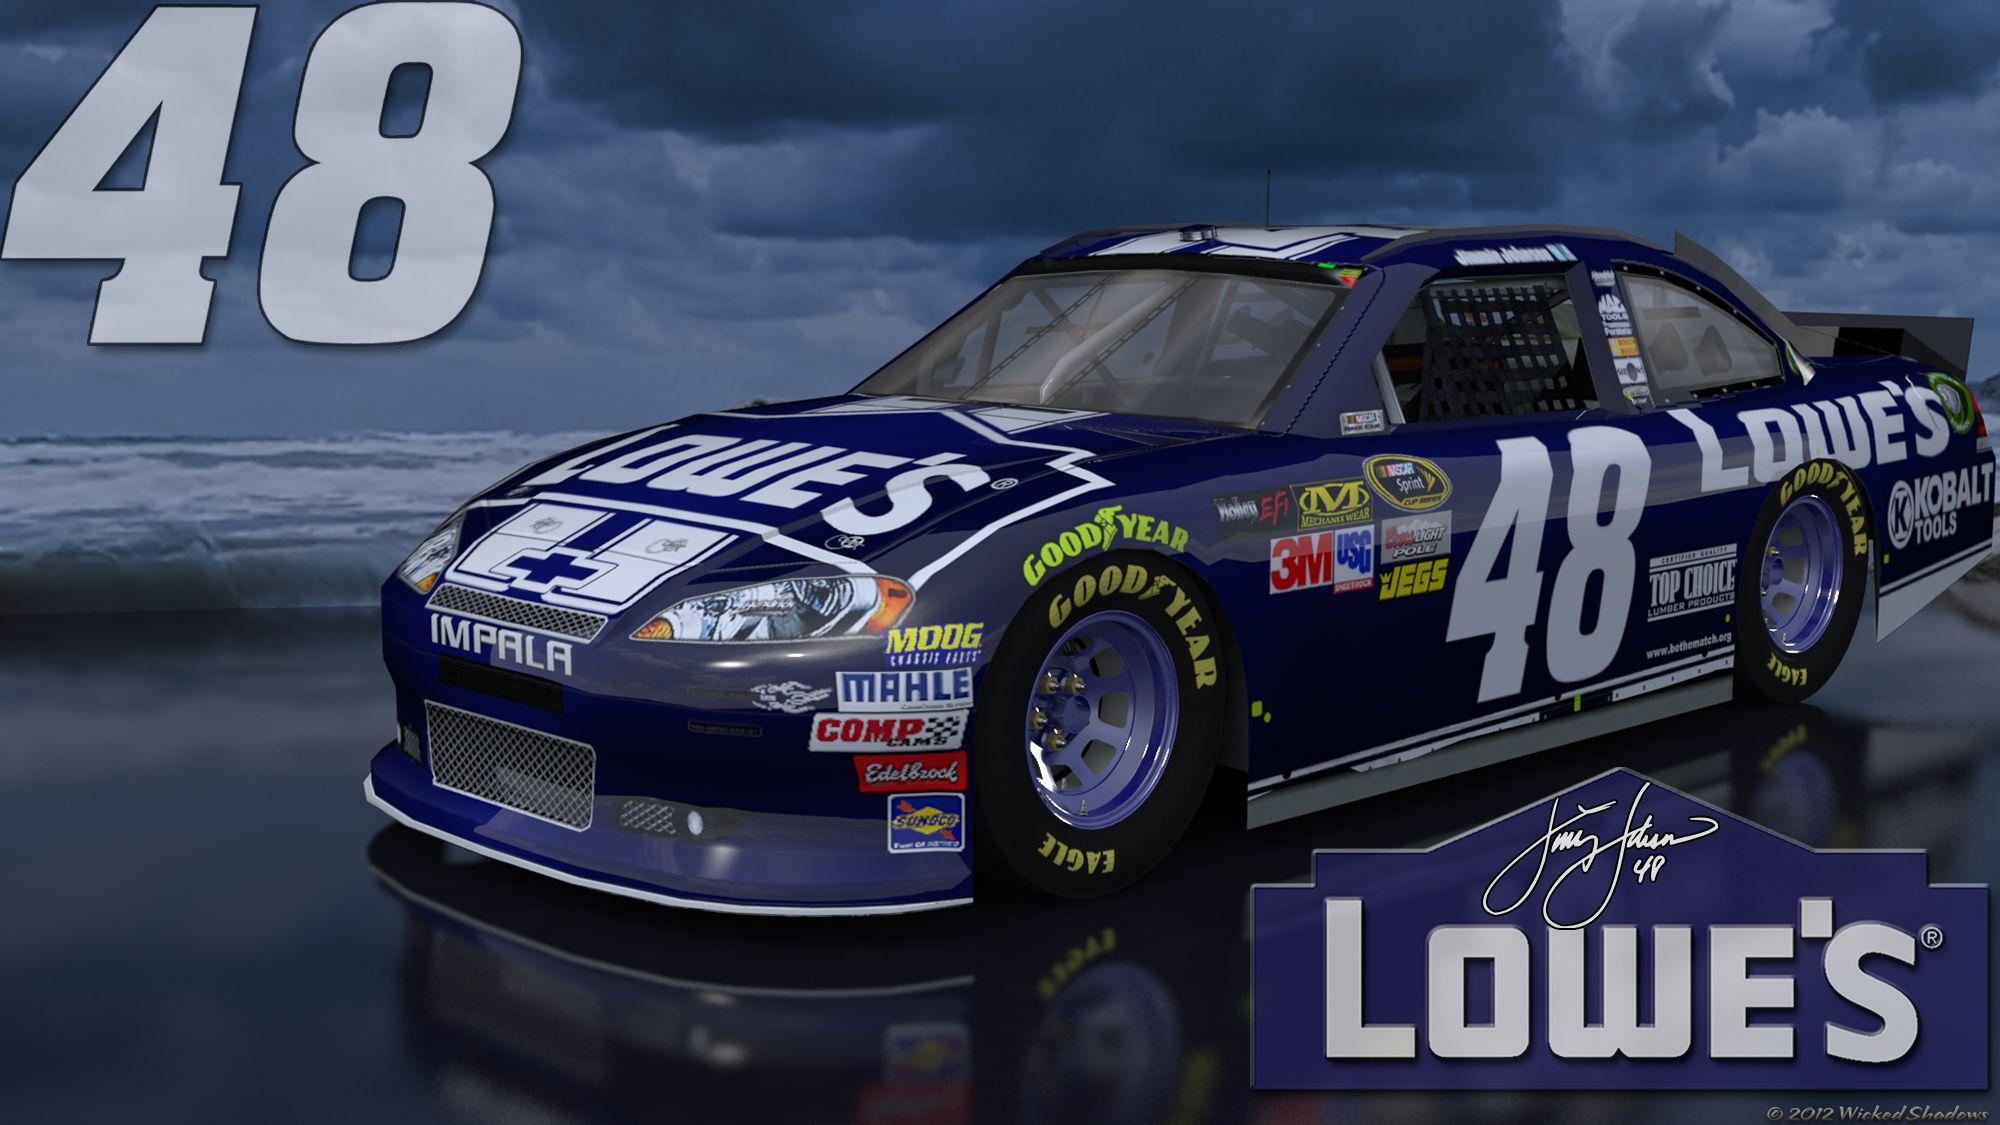 Wallpaper By Wicked Shadows: Jimmie Johnson Blue Lowes 48 Outdoor